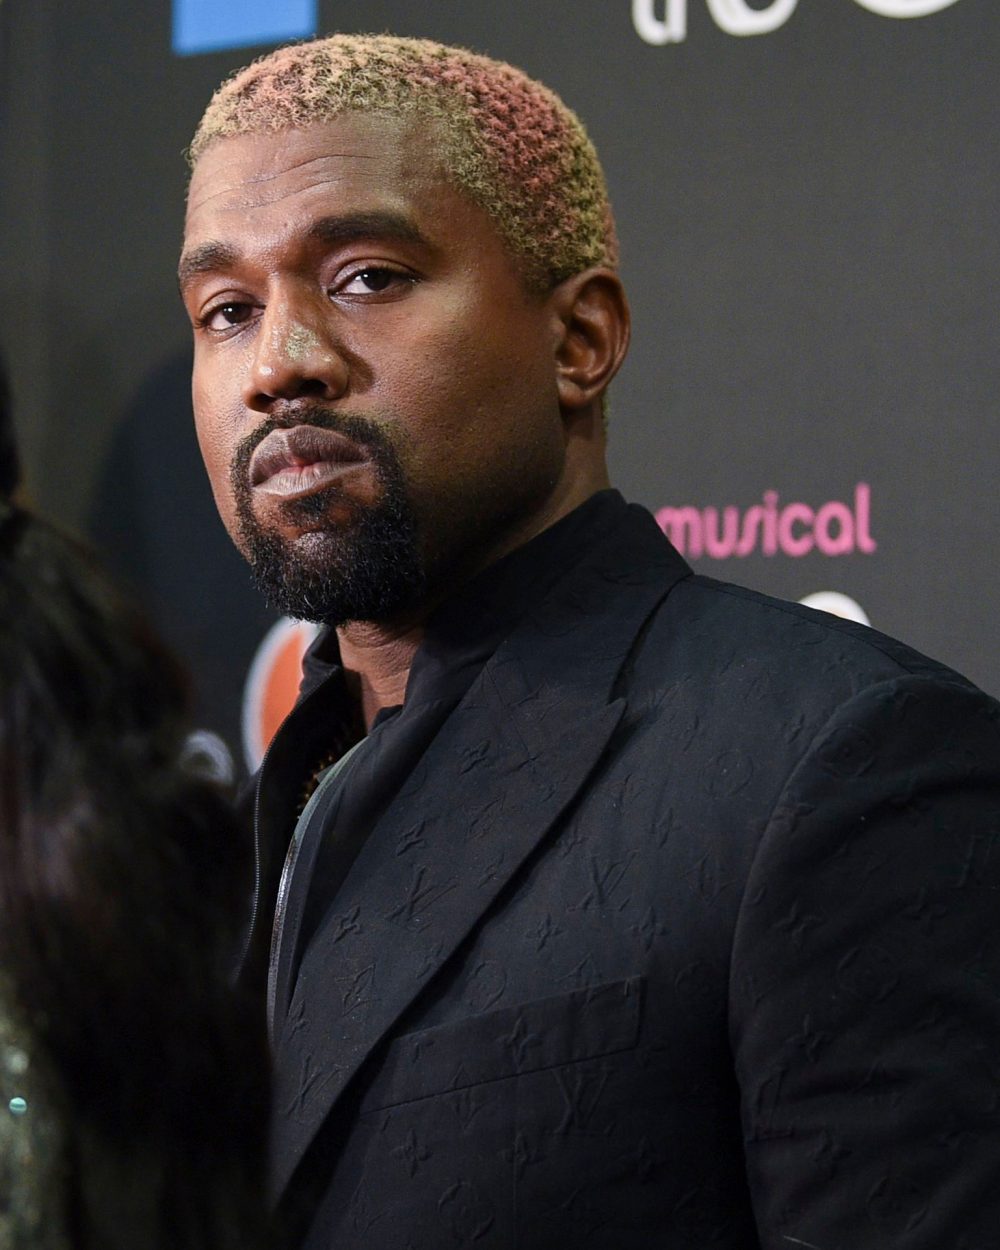 TJ Maxx rejects Yeezy brand amid Kanye West fallout